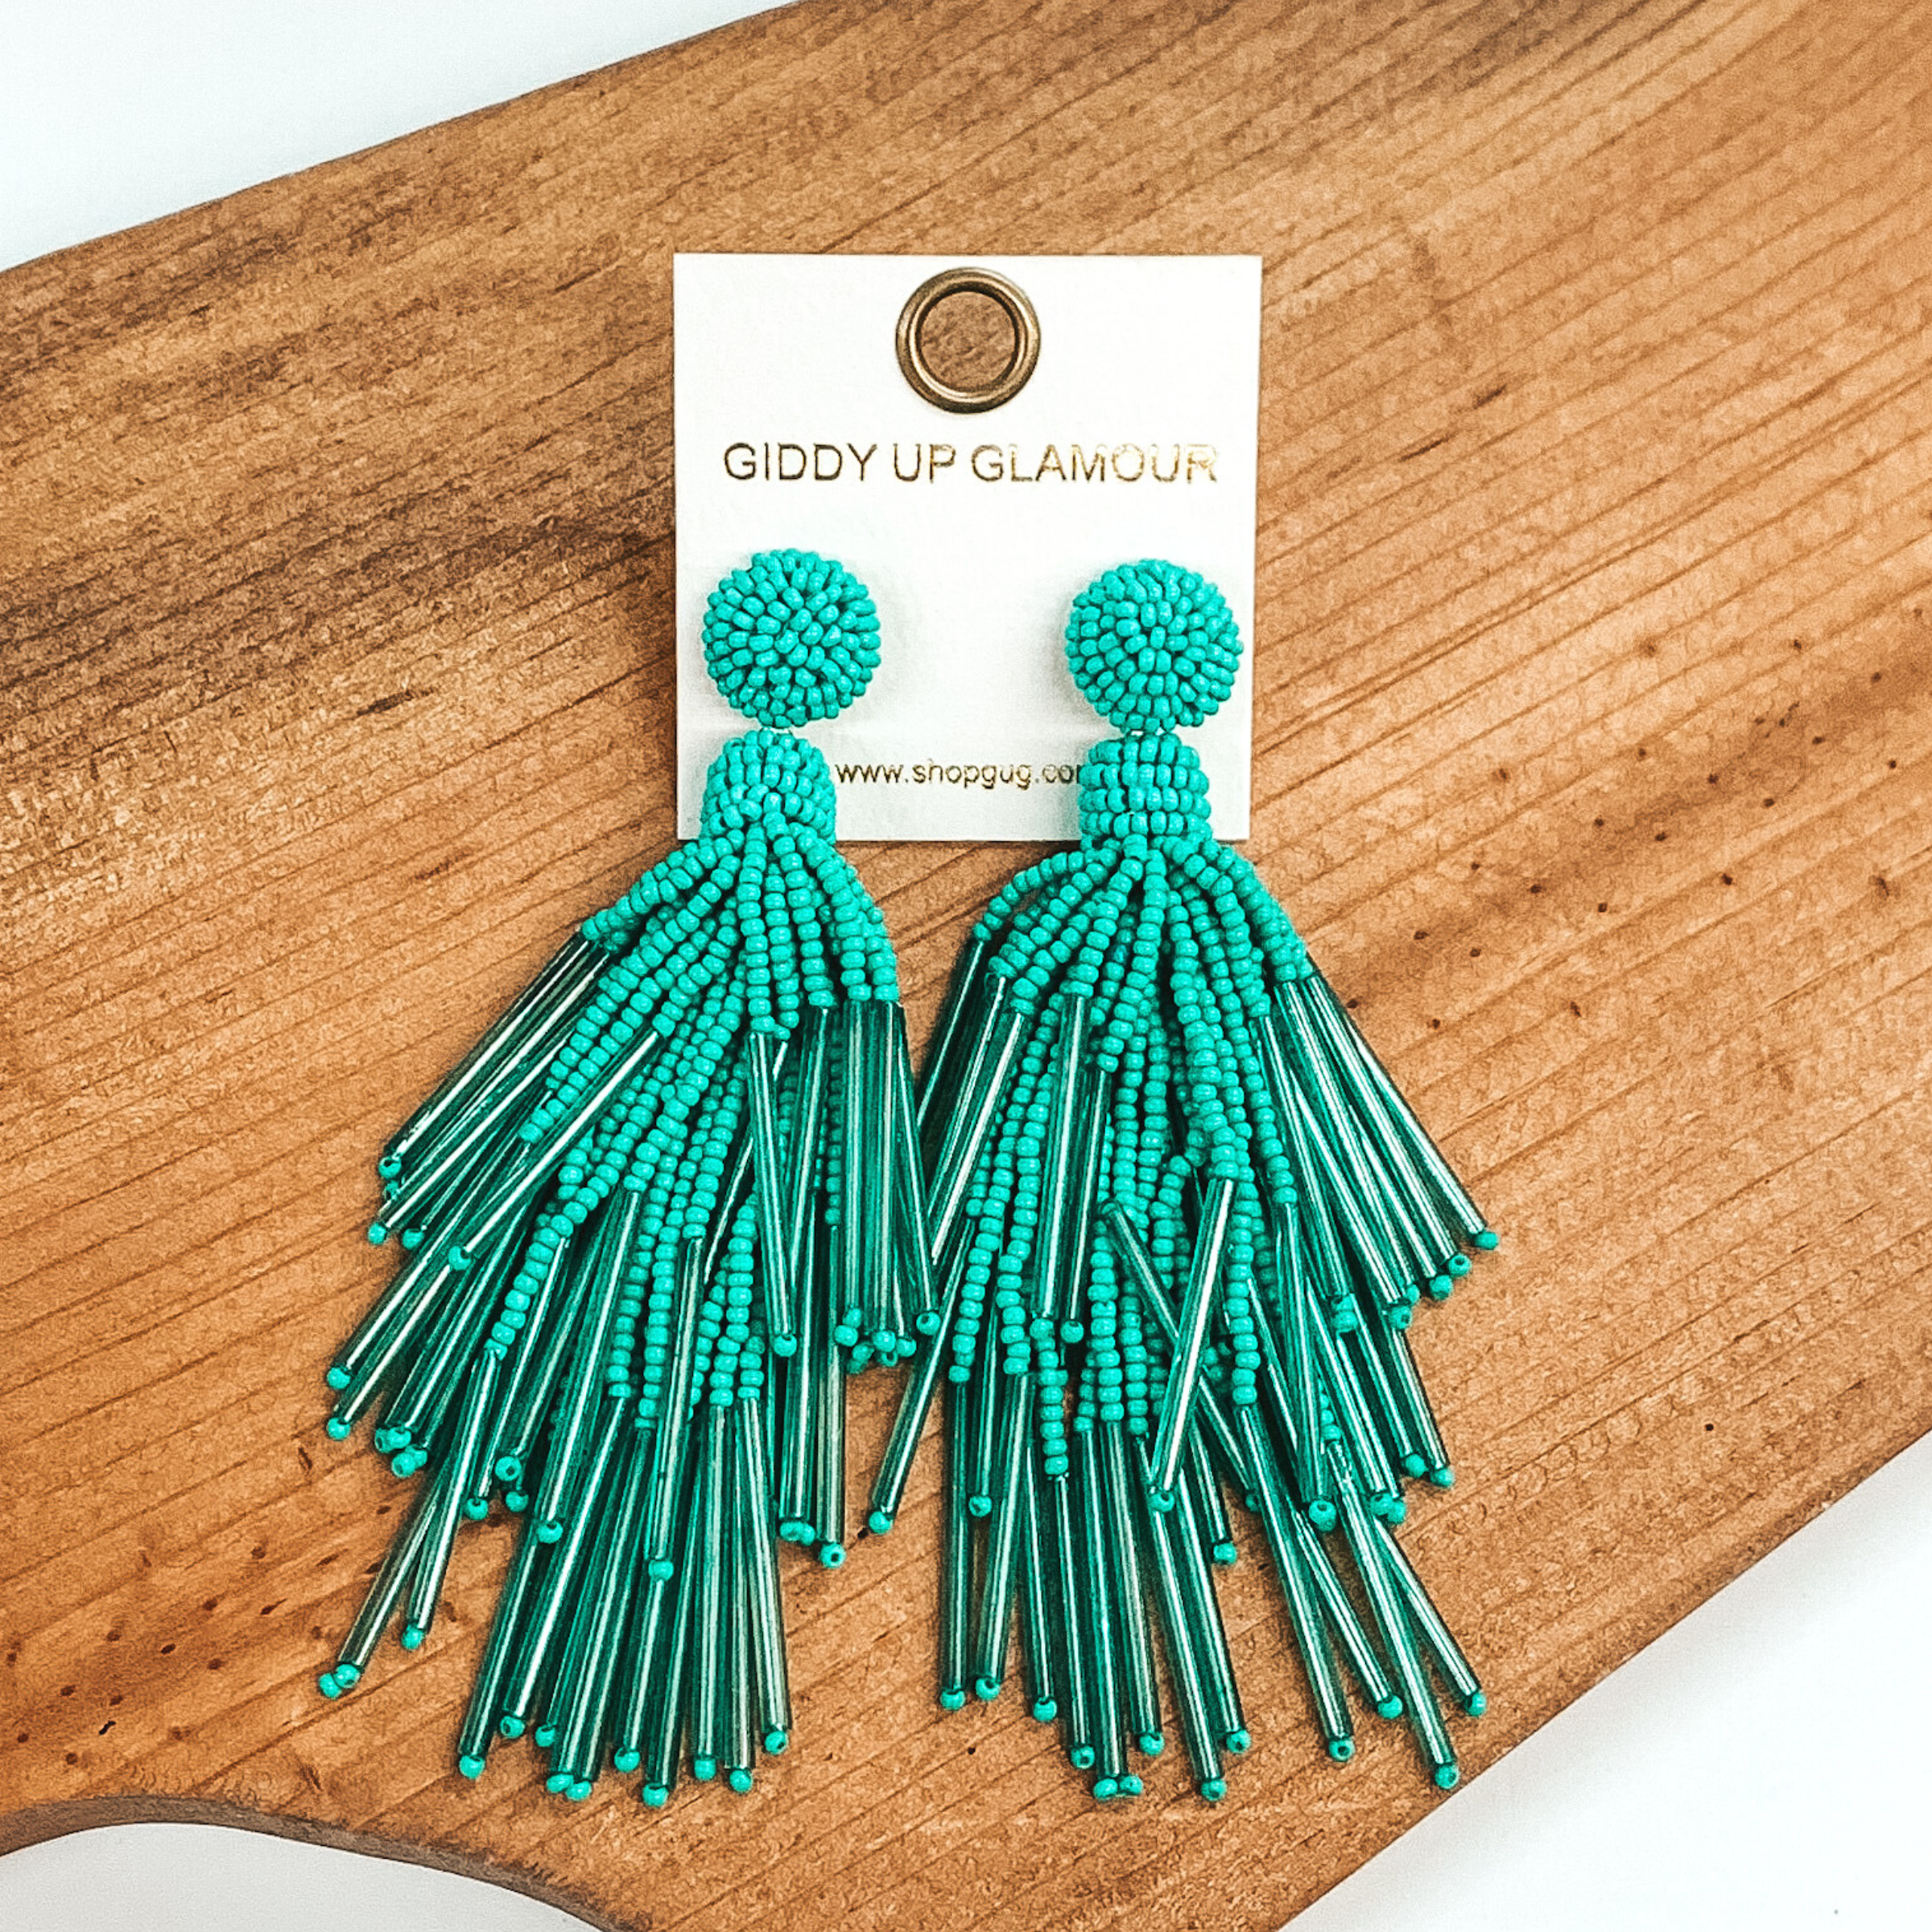 Circle beaded stud earrings with a beaded tassel in turquoise. These earrings are pictured laying on a brown piece of wood on a white background.